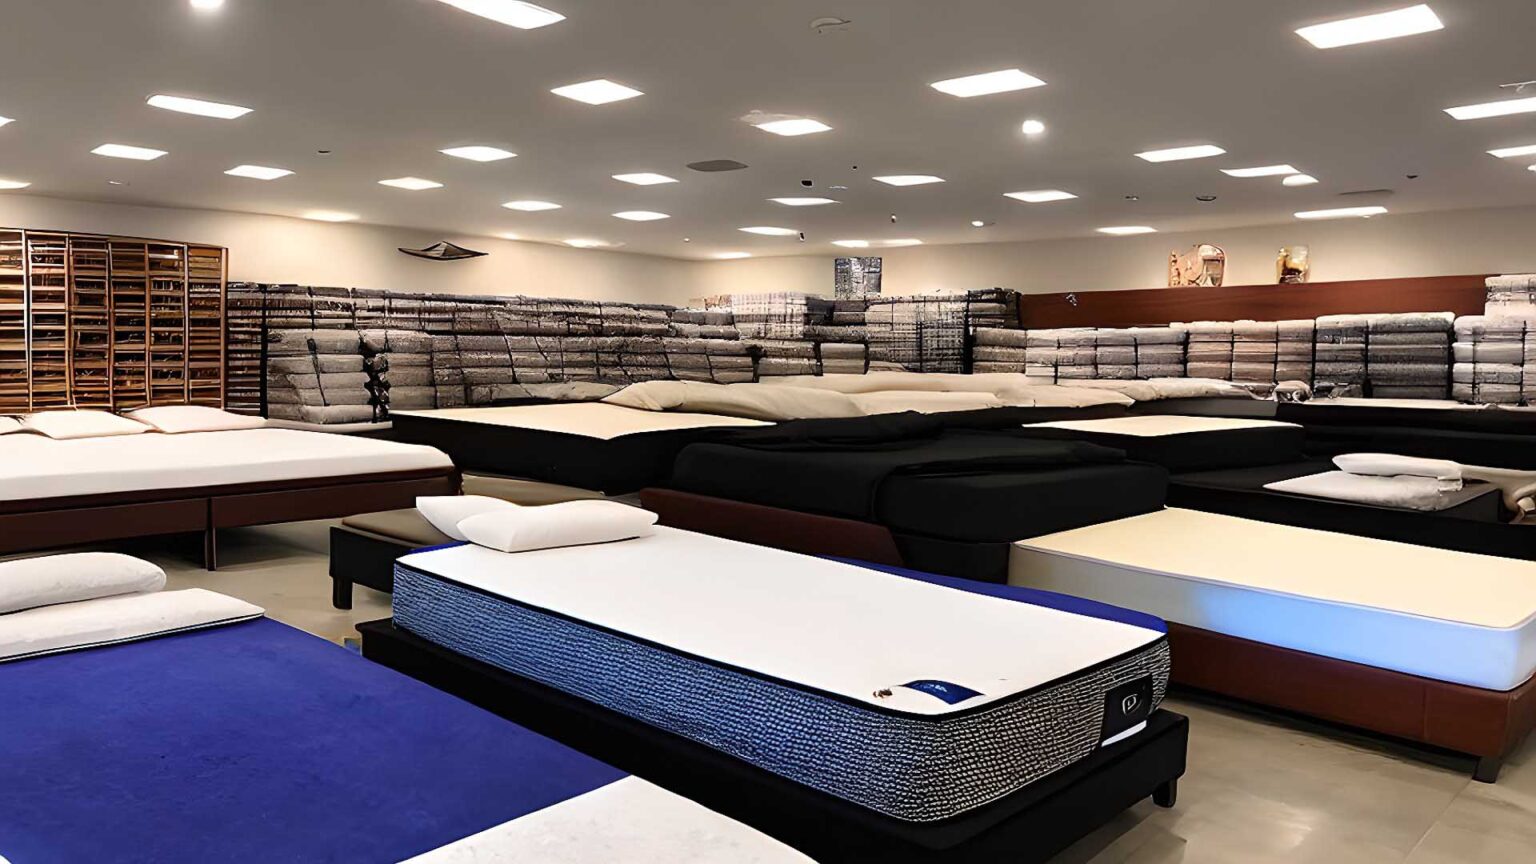 Mattress Stores, mattress dealers, and mattress retailers near me in Indianapolis, IN